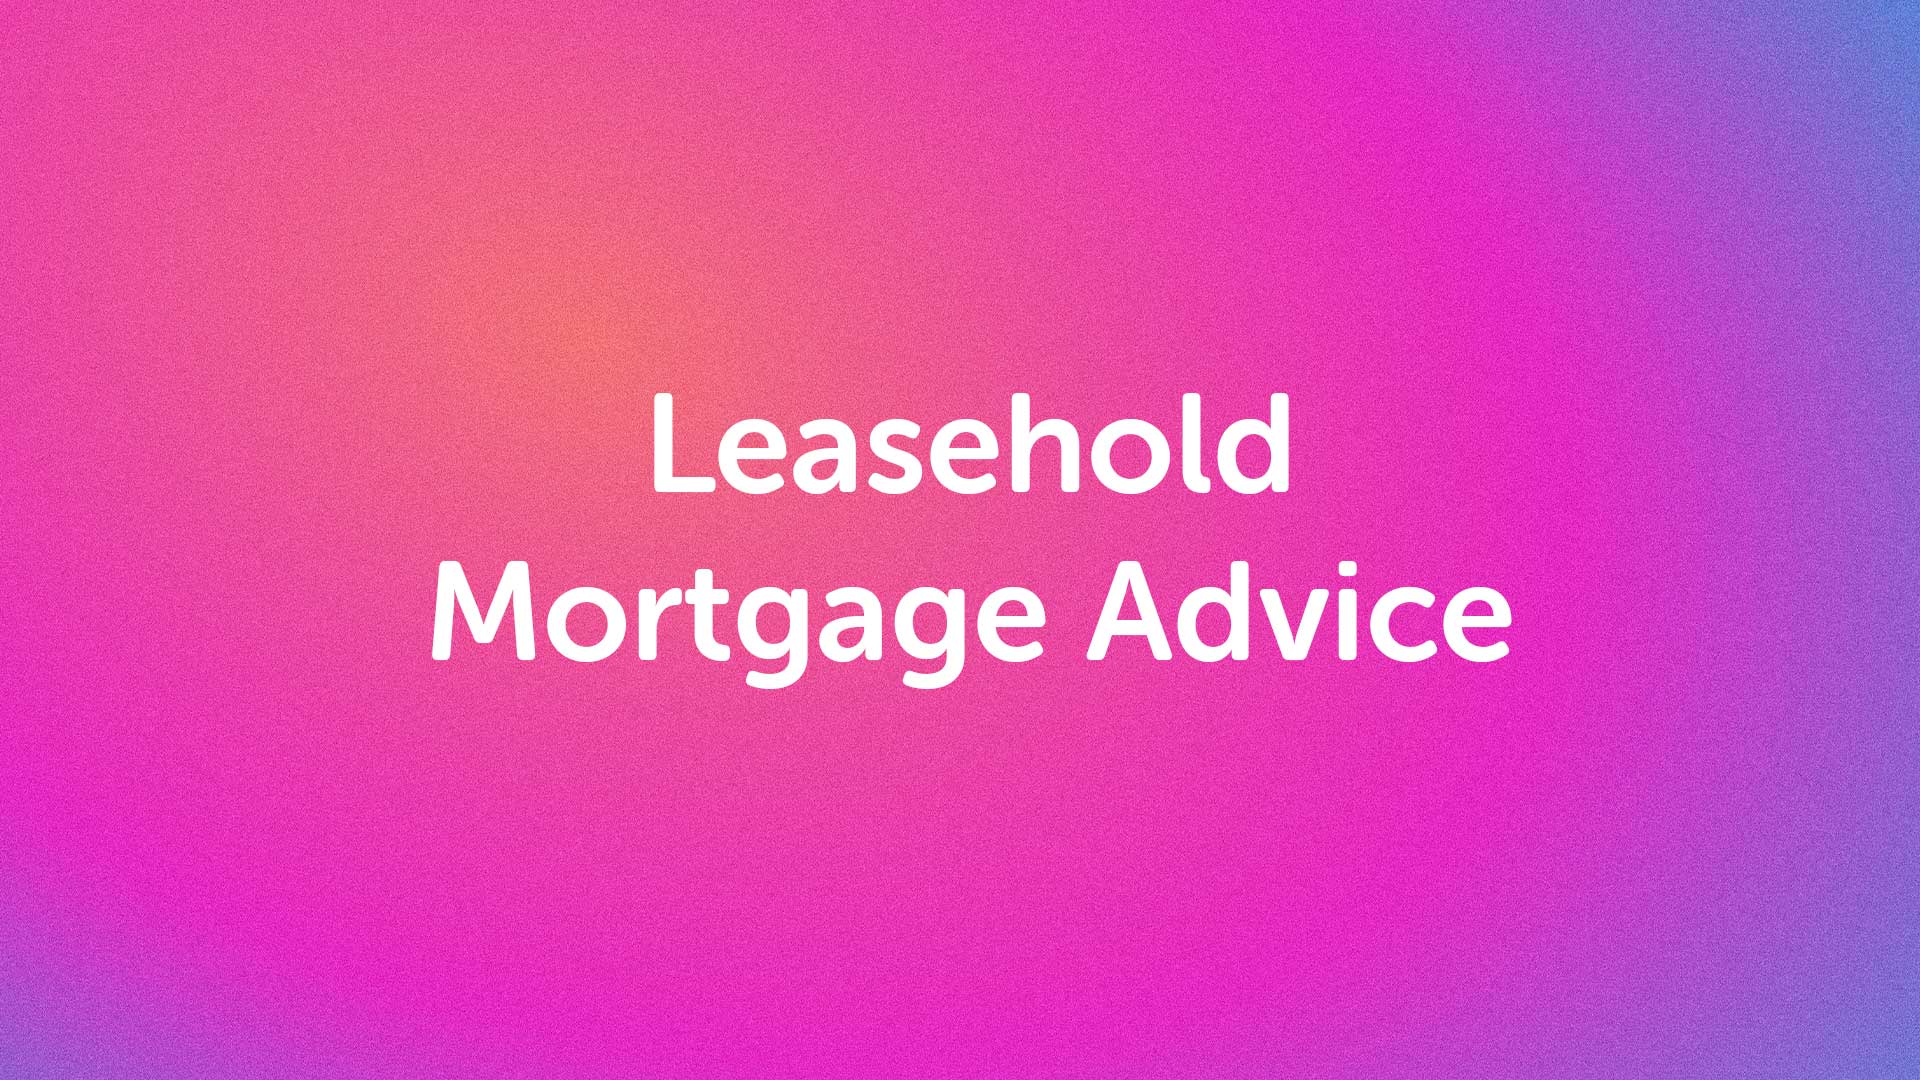 Leasehold Mortgage Advice in Liverpool | Liverpoolmoneyman